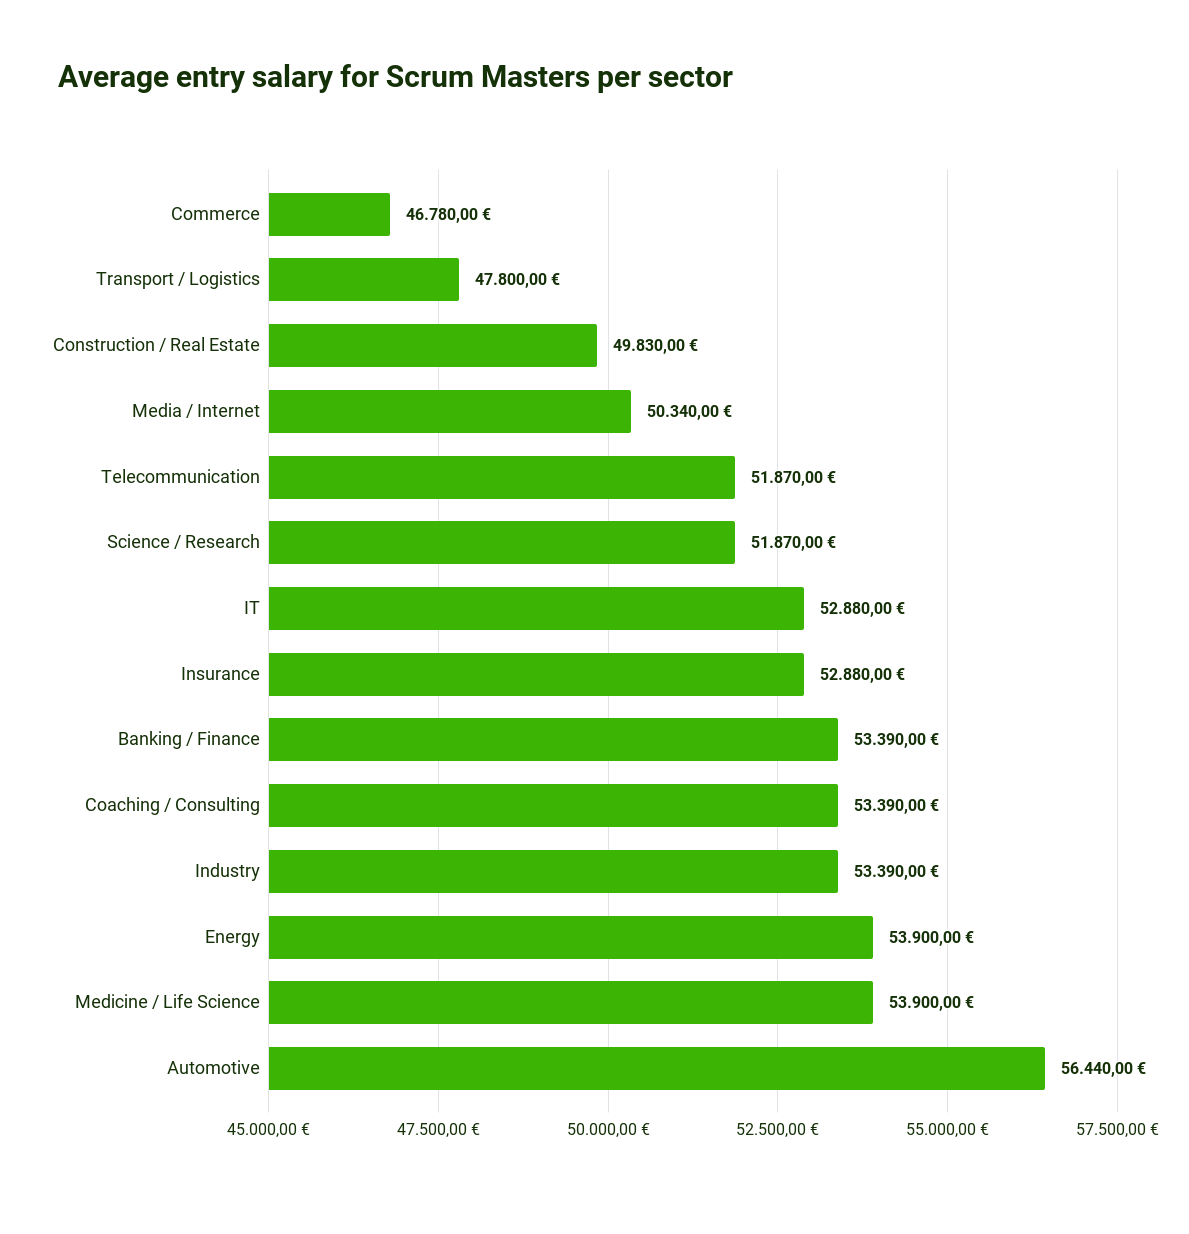 Scrum Statistics 2023 - The average salary for Scrum Masters varies greatly depending on the industry. In retail it is 46,780€ and in the automotive industry 56,440€.